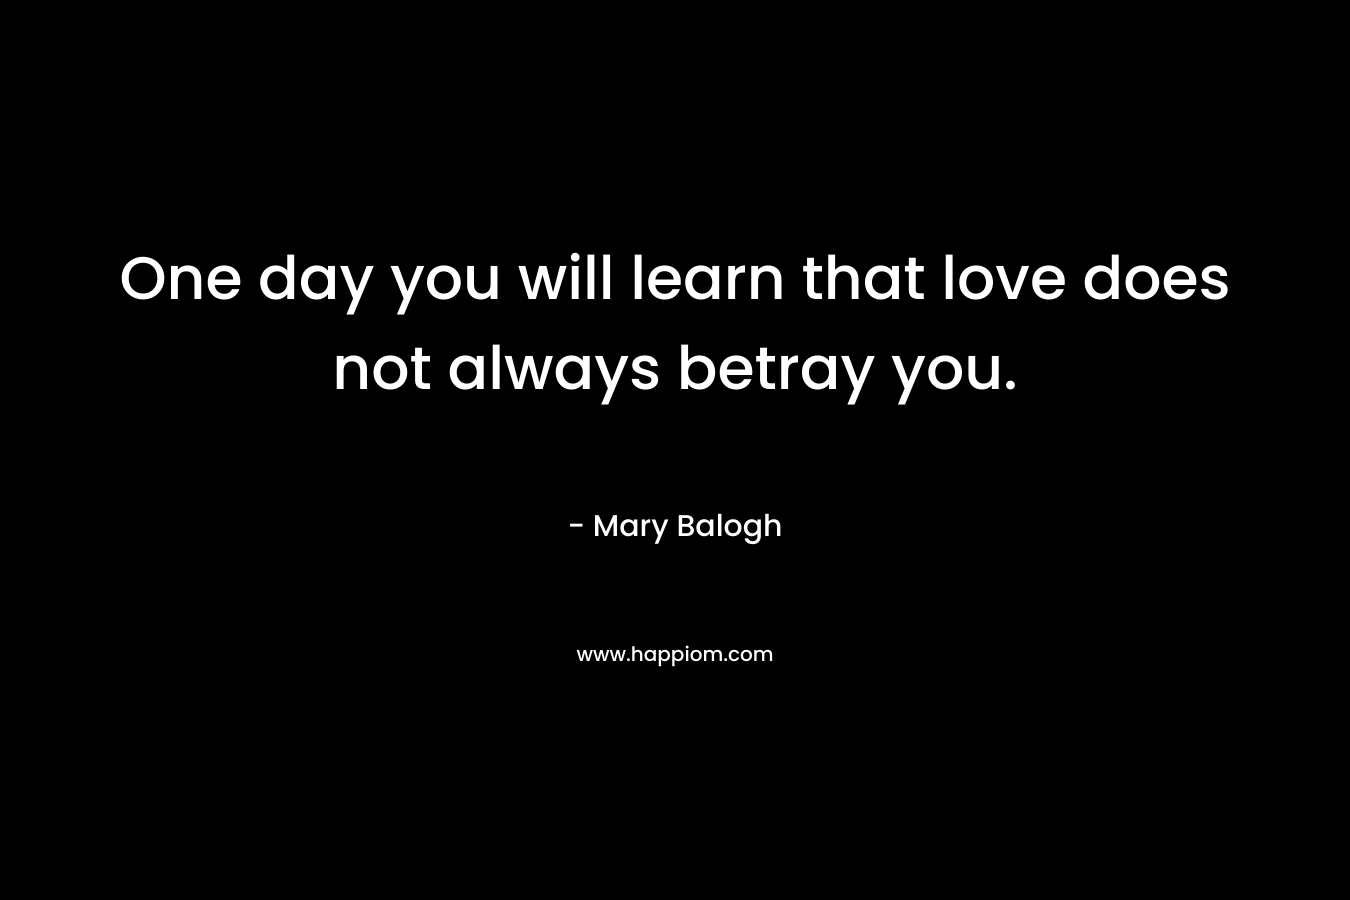 One day you will learn that love does not always betray you. – Mary Balogh